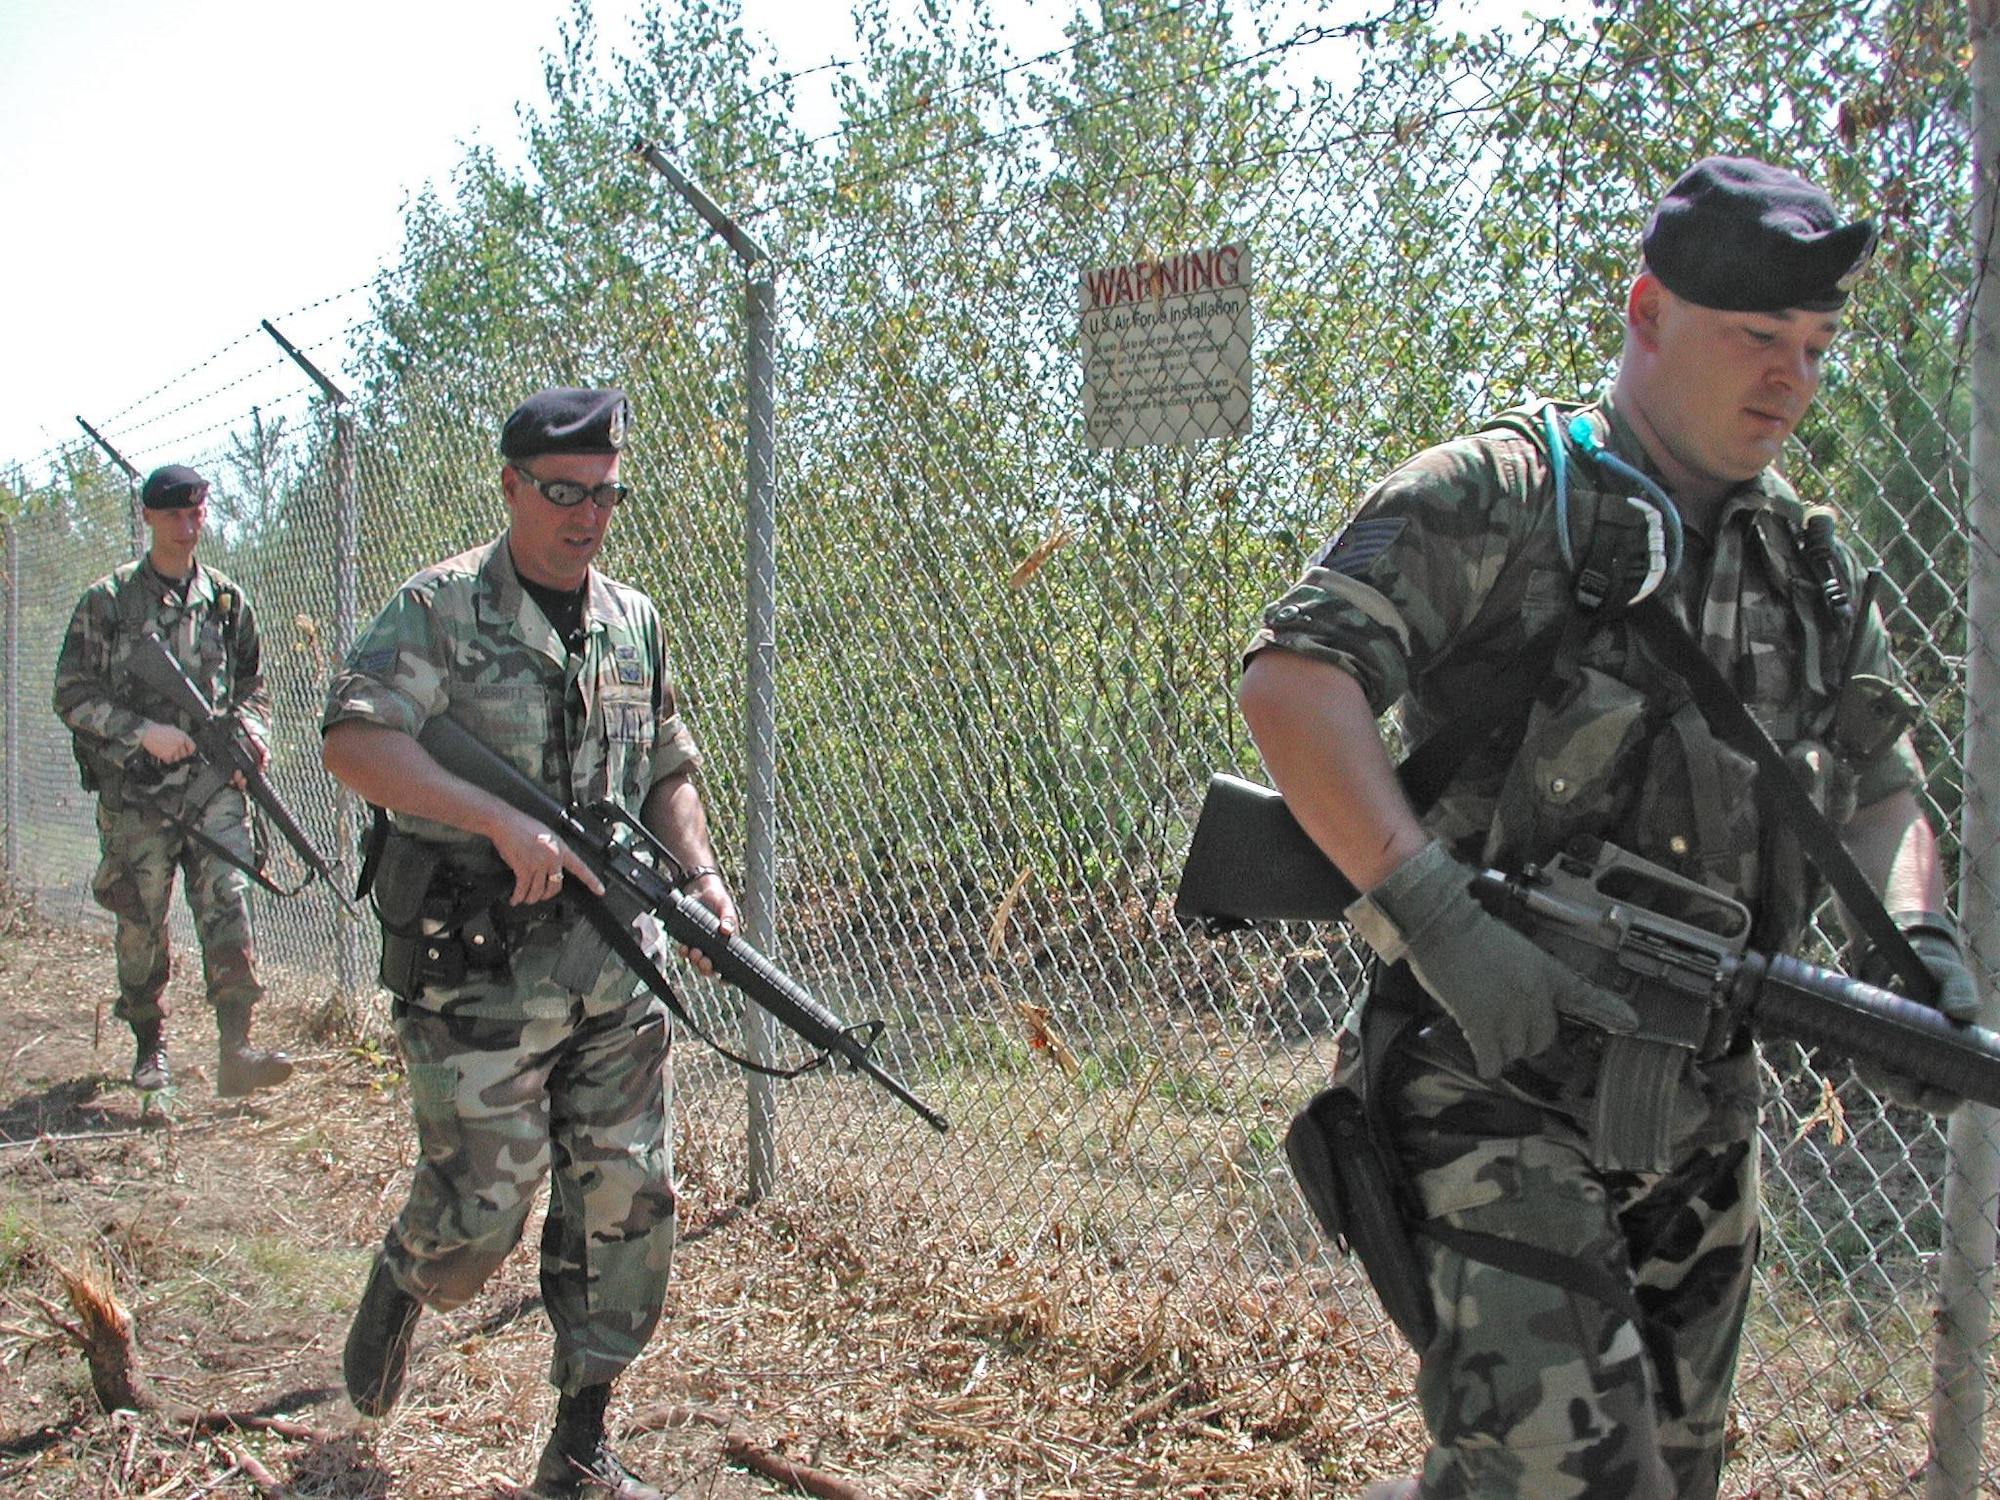 Throughout the day, Westover and bases around the world increased security measures. The Massachusetts State police and Chicopee Police Department arrived with working dogs to help support the base security forces at the main gate and perimeter, while volunteers from the 439th Maintenance Squadron stood guard at entry control points to the flight line and others others checked IDs at building entrances. (U.S. Air Force courtesy photo)